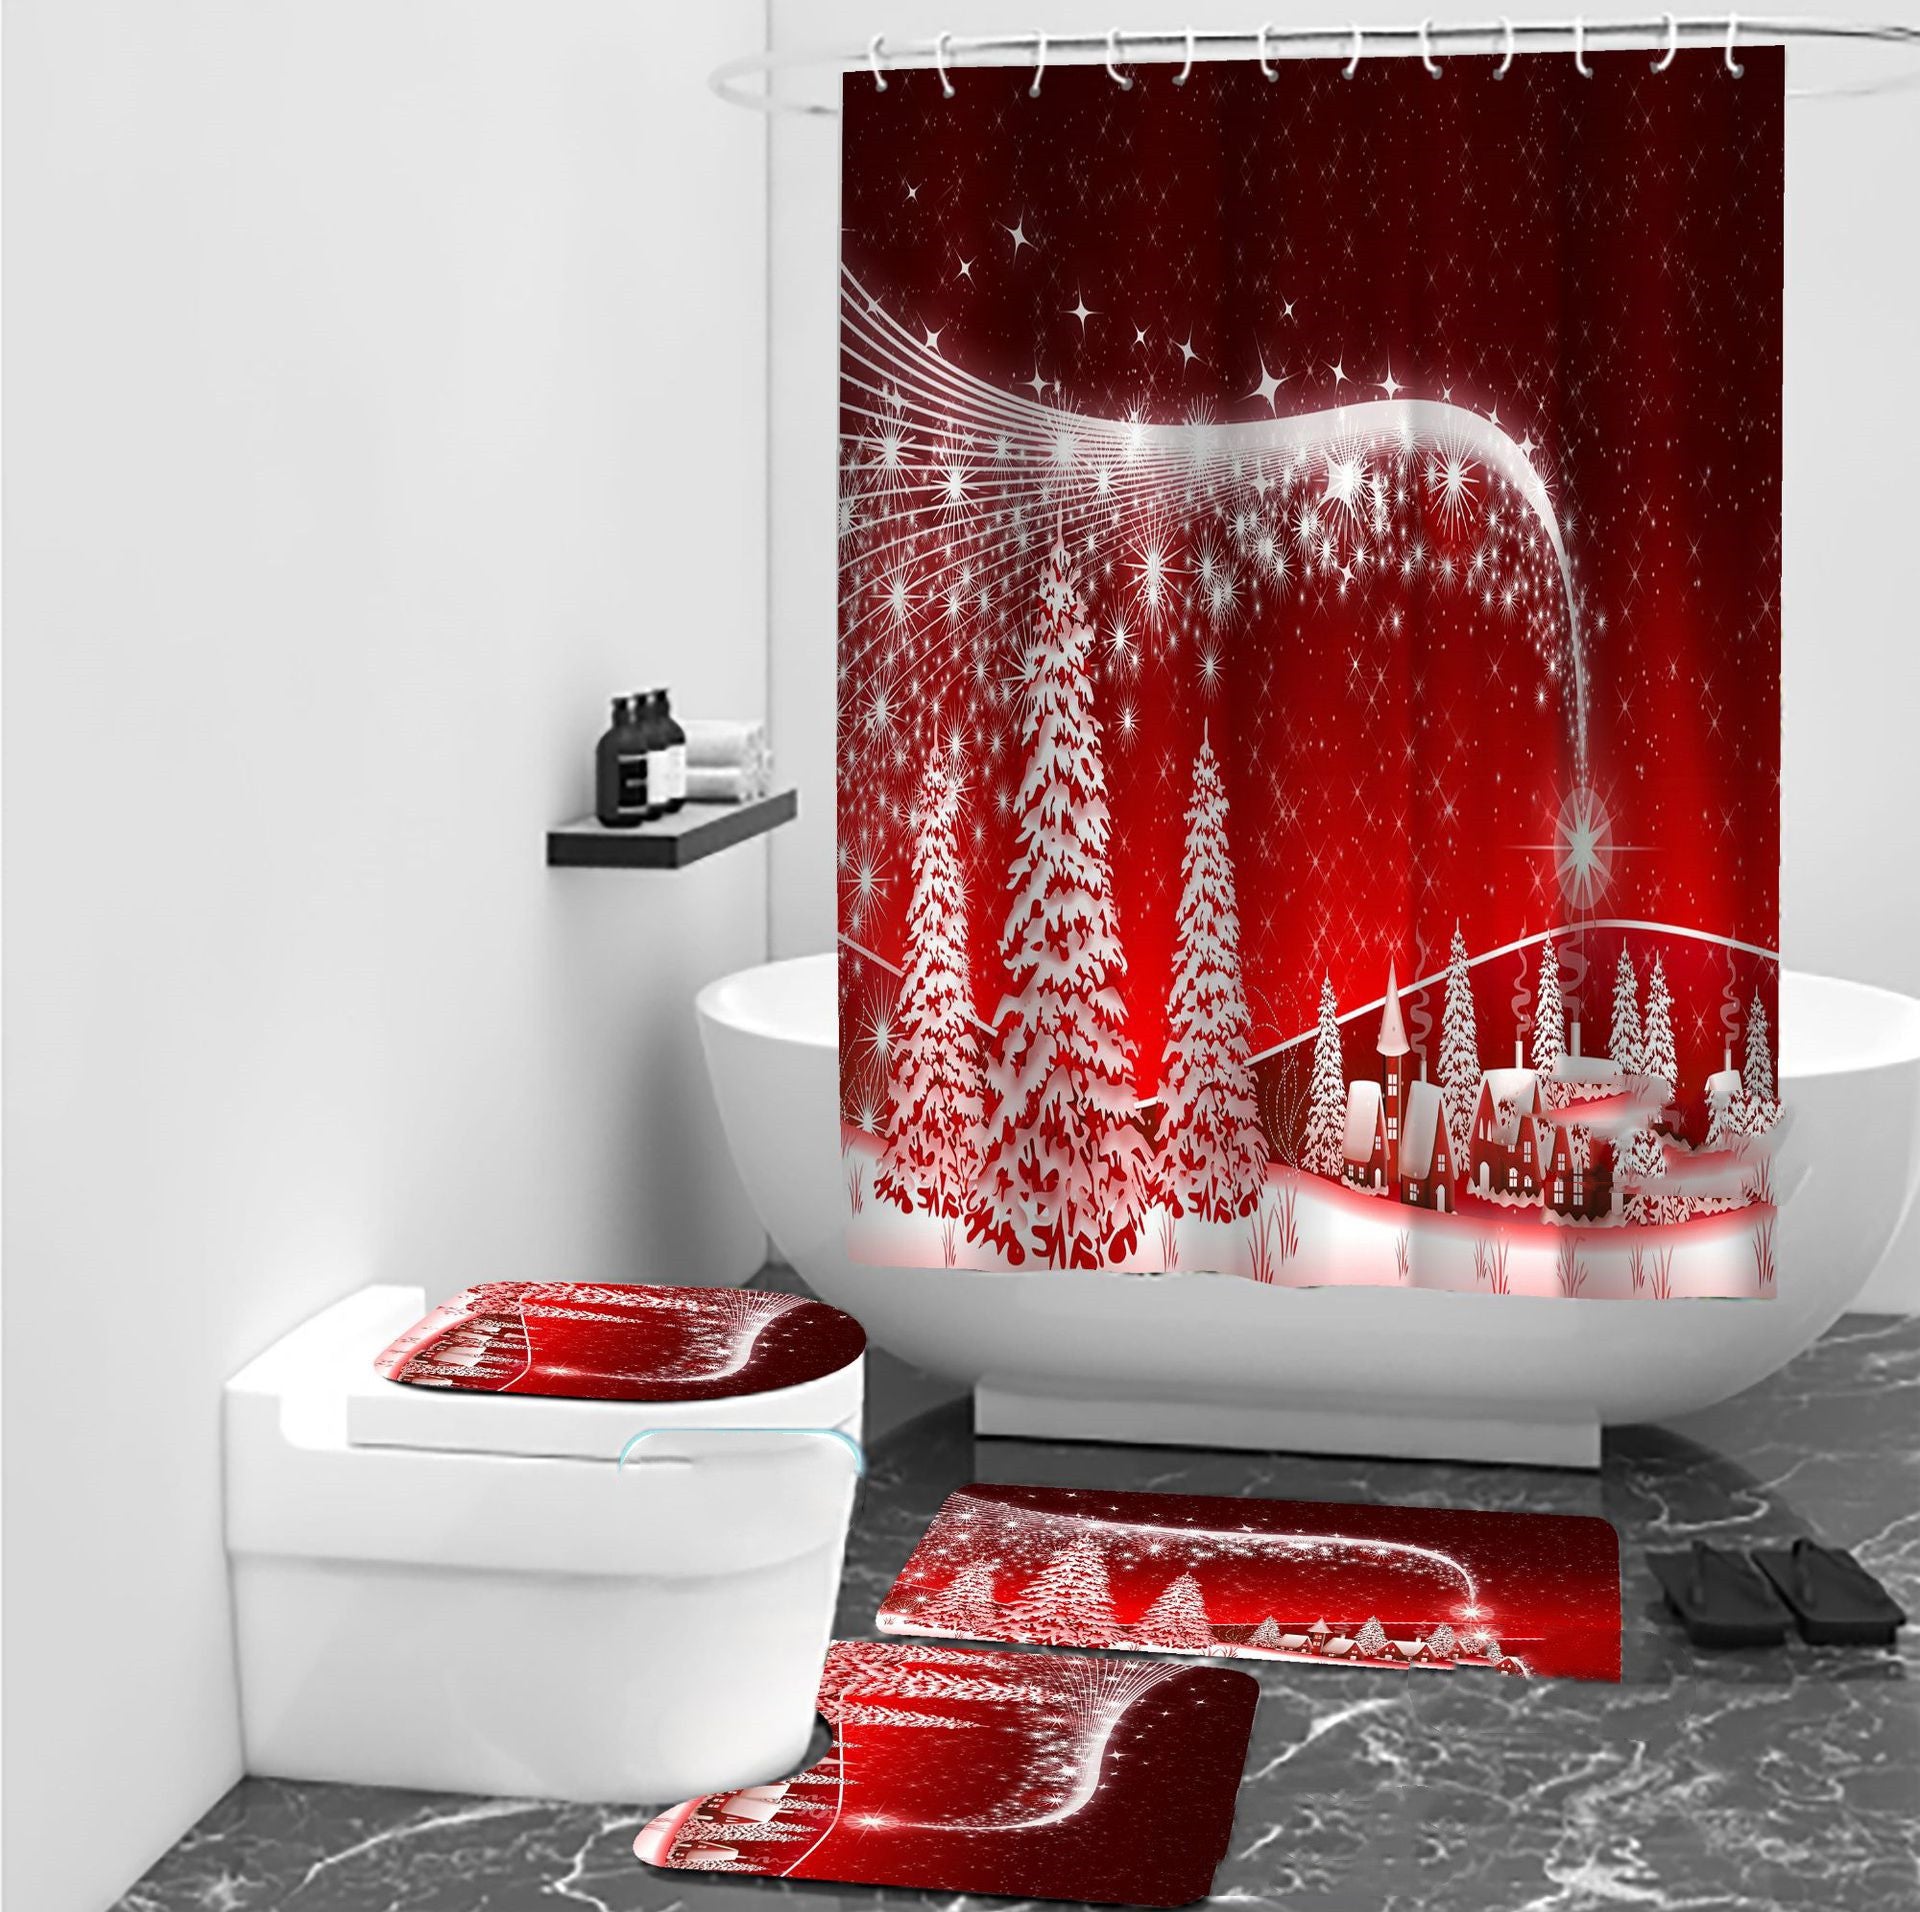 Christmas Digital Printing Waterproof Shower Curtain, Outdoor and Indoor Christmas decorations Items, Christmas ornaments, Christmas tree decorations, salt dough ornaments, Christmas window decorations, cheap Christmas decorations, snowmen, and ornaments.